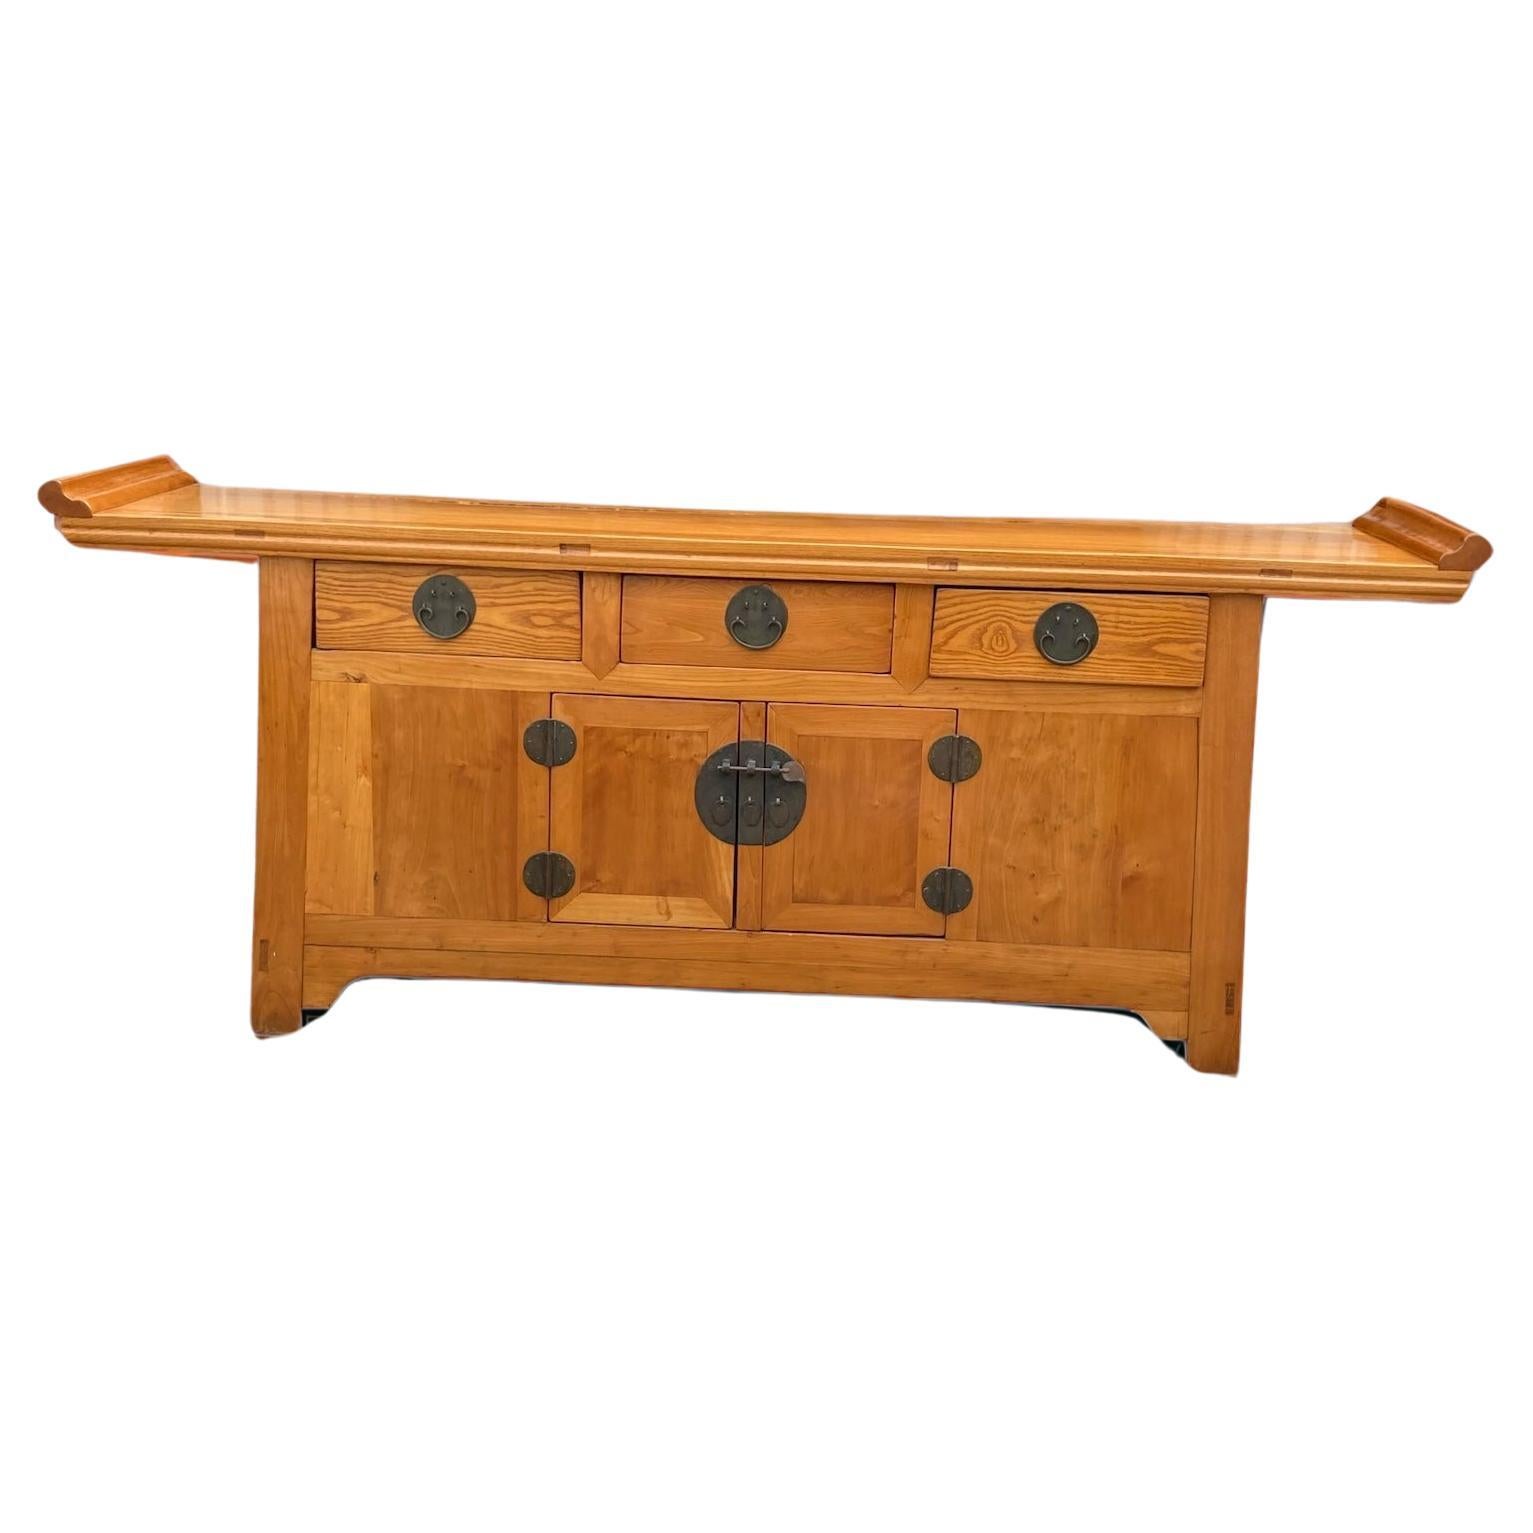 An Elmwood Chinoiserie style alter sideboard